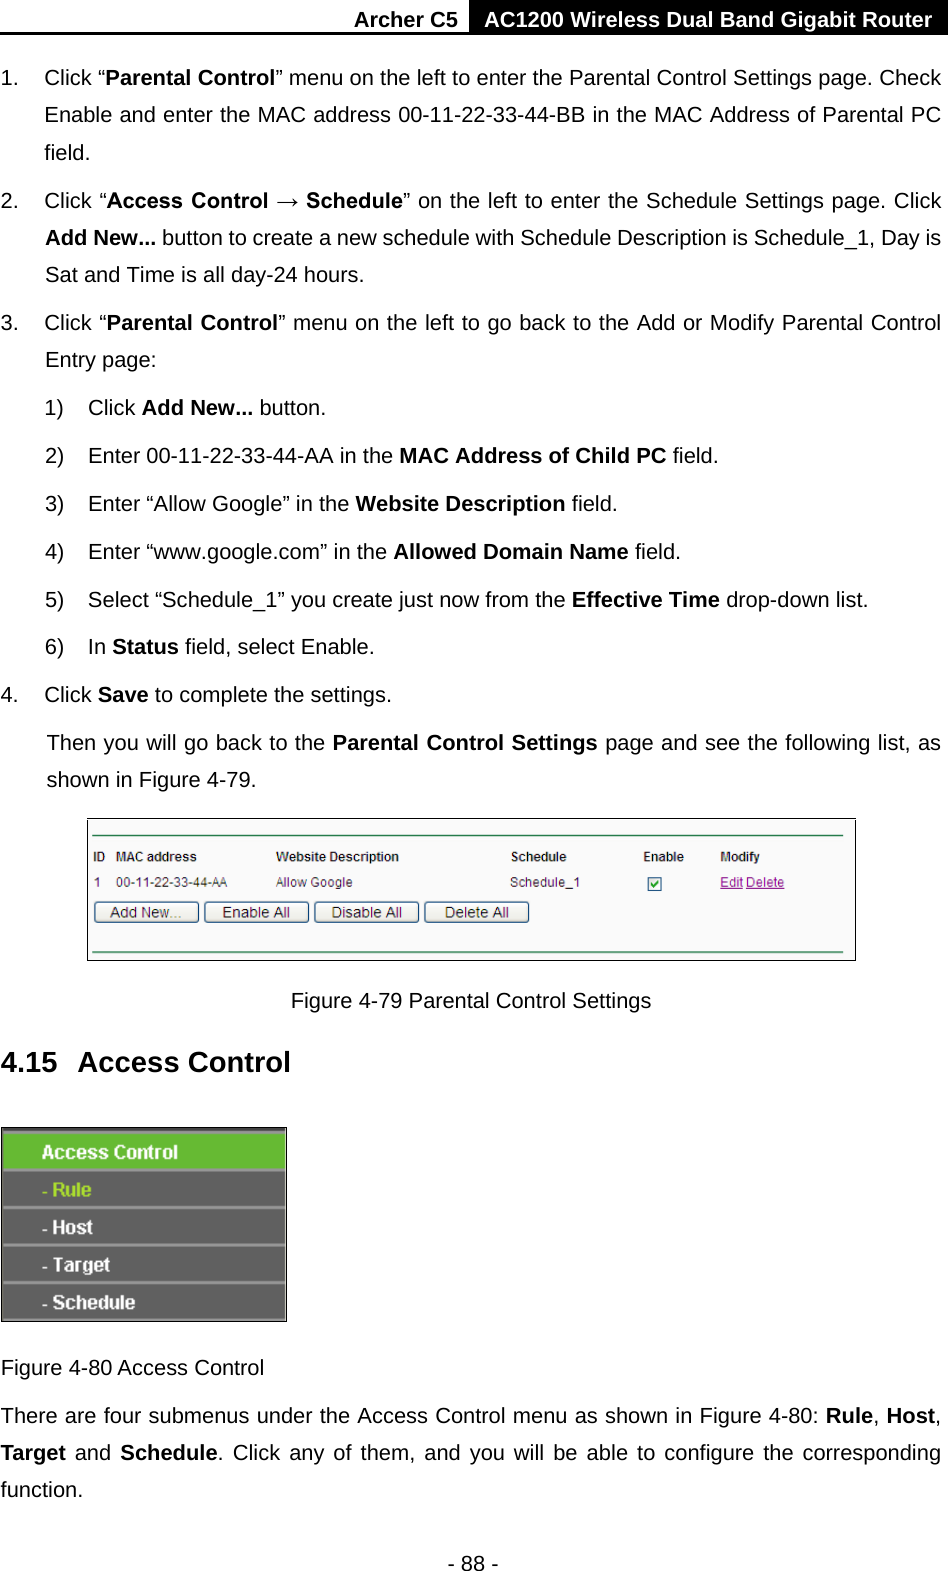 Archer C5 AC1200 Wireless Dual Band Gigabit Router  - 88 - 1. Click “Parental Control” menu on the left to enter the Parental Control Settings page. Check Enable and enter the MAC address 00-11-22-33-44-BB in the MAC Address of Parental PC field.   2. Click “Access Control → Schedule” on the left to enter the Schedule Settings page. Click Add New... button to create a new schedule with Schedule Description is Schedule_1, Day is Sat and Time is all day-24 hours.   3. Click “Parental Control” menu on the left to go back to the Add or Modify Parental Control Entry page:   1) Click Add New... button.   2) Enter 00-11-22-33-44-AA in the MAC Address of Child PC field.   3) Enter “Allow Google” in the Website Description field.   4) Enter “www.google.com” in the Allowed Domain Name field.   5) Select “Schedule_1” you create just now from the Effective Time drop-down list.   6) In Status field, select Enable.   4. Click Save to complete the settings. Then you will go back to the Parental Control Settings page and see the following list, as shown in Figure 4-79.  Figure 4-79 Parental Control Settings 4.15  Access Control  Figure 4-80 Access Control There are four submenus under the Access Control menu as shown in Figure 4-80: Rule, Host, Target and Schedule. Click any of them, and you will be able to configure the corresponding function. 